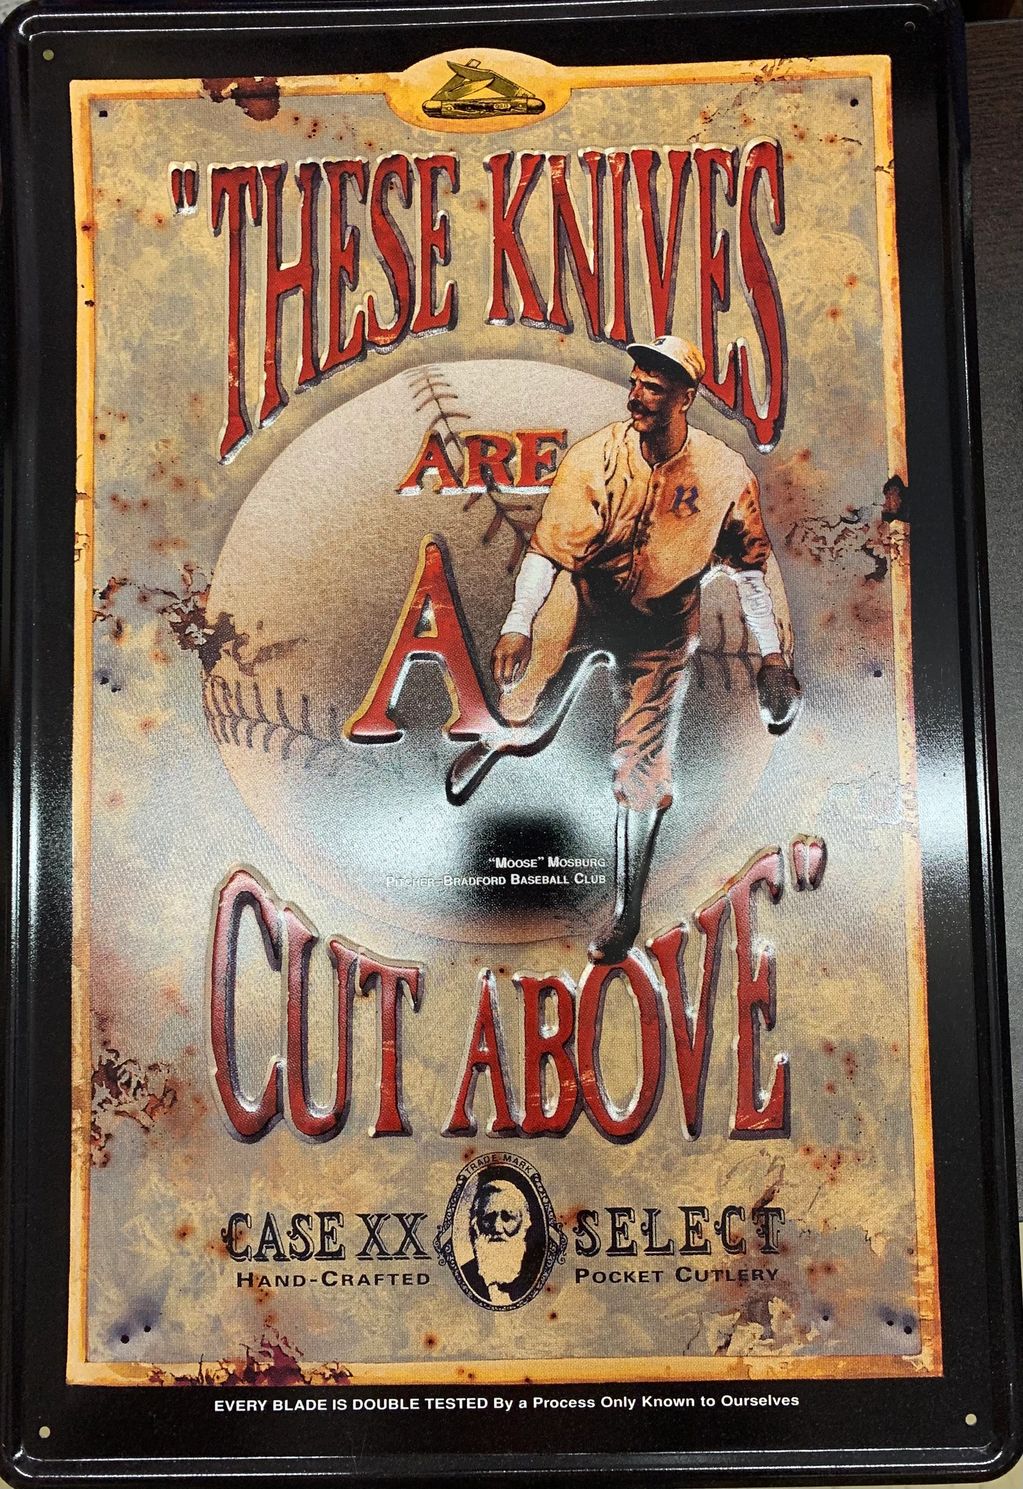 Case metal "THESE KNIVES ARE A CUT ABOVE" sign with Moose Mossberg